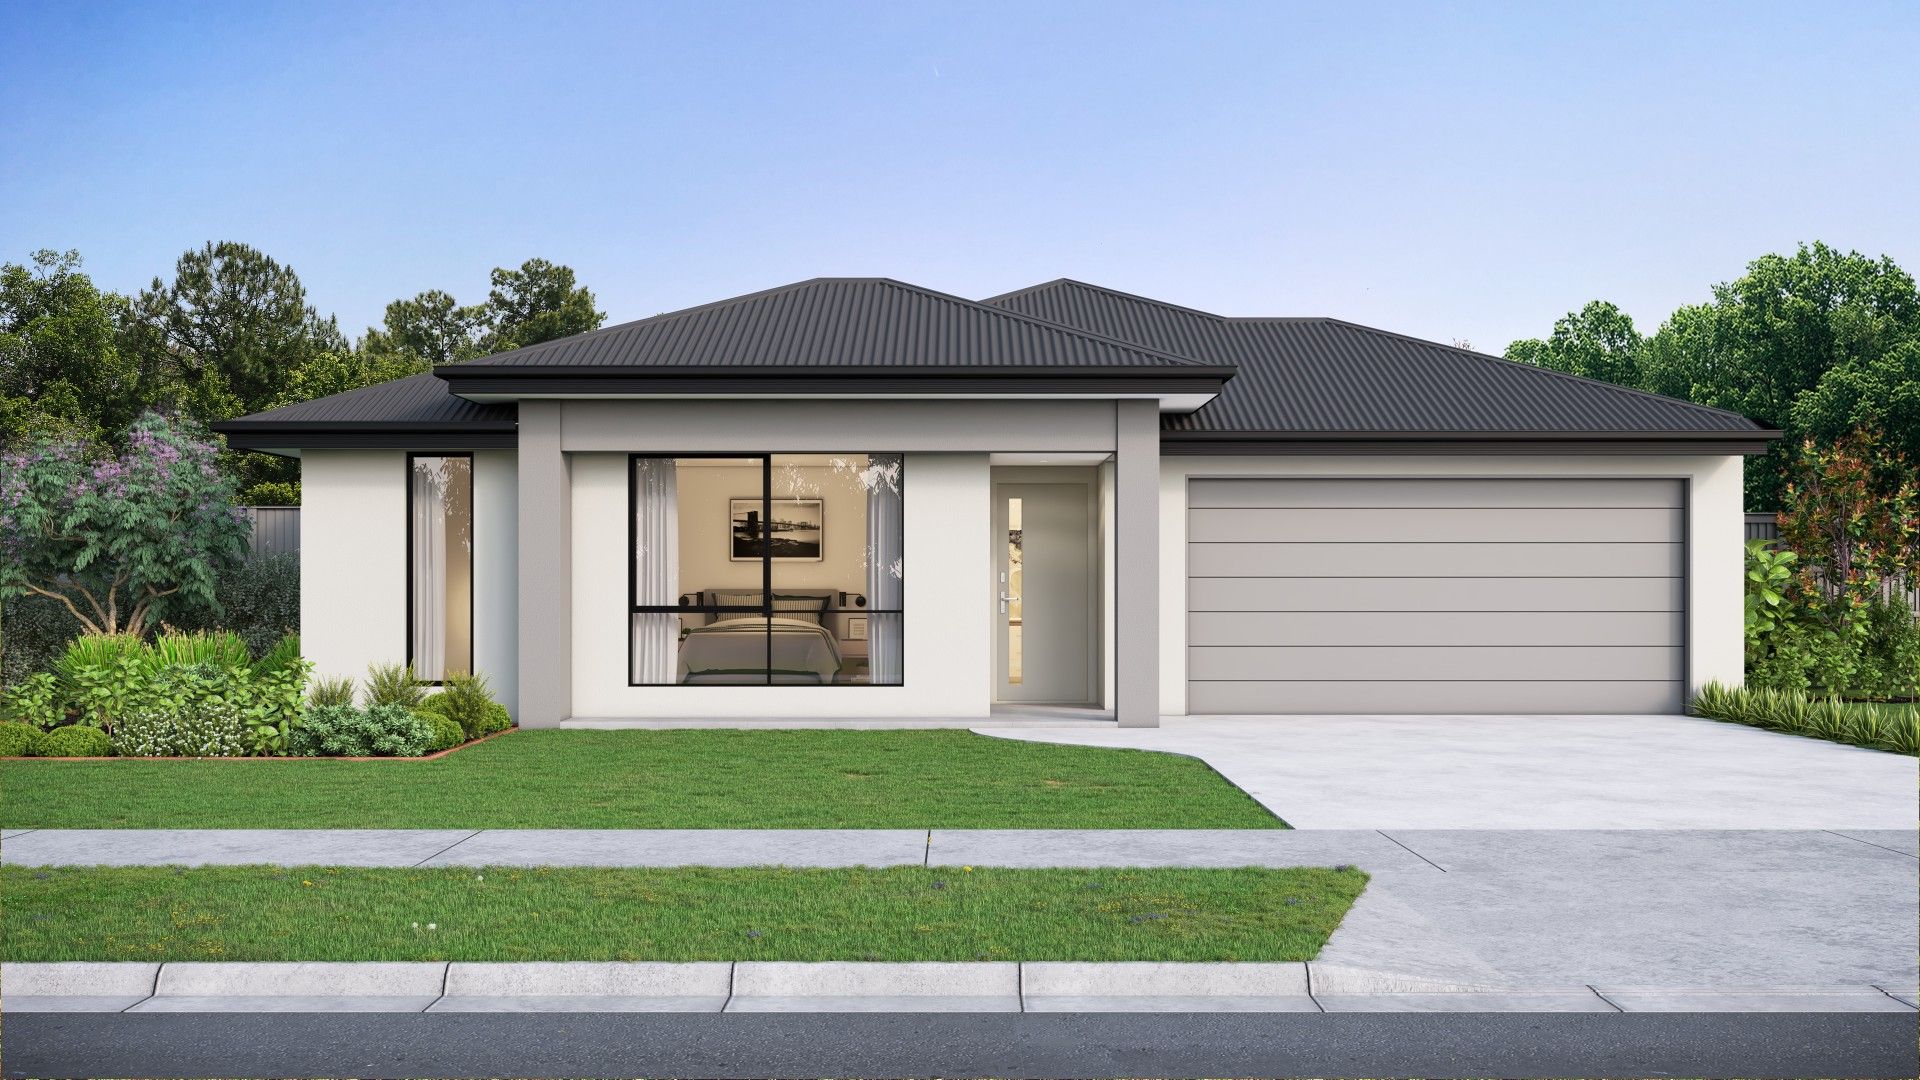 4 bedrooms New House & Land in lot Canal Street FRASER RISE VIC, 3336